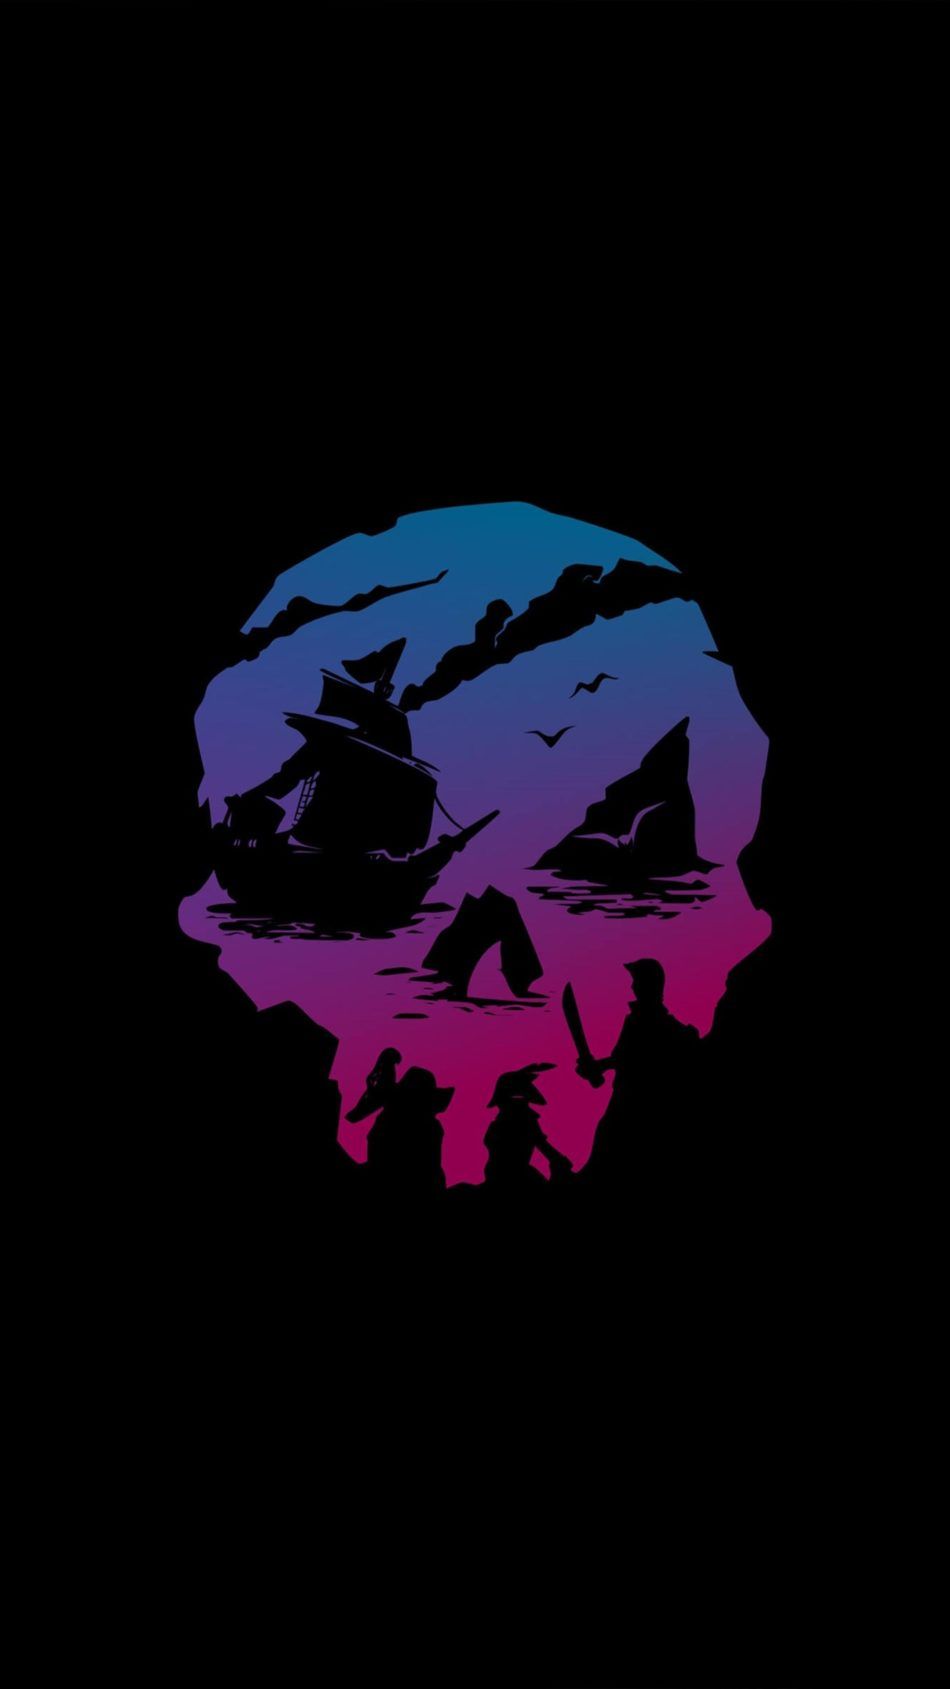 Sea of Thieves Minimal 4K Ultra HD Mobile Wallpaper. Sea of thieves, 4k gaming wallpaper, Sea of thieves game